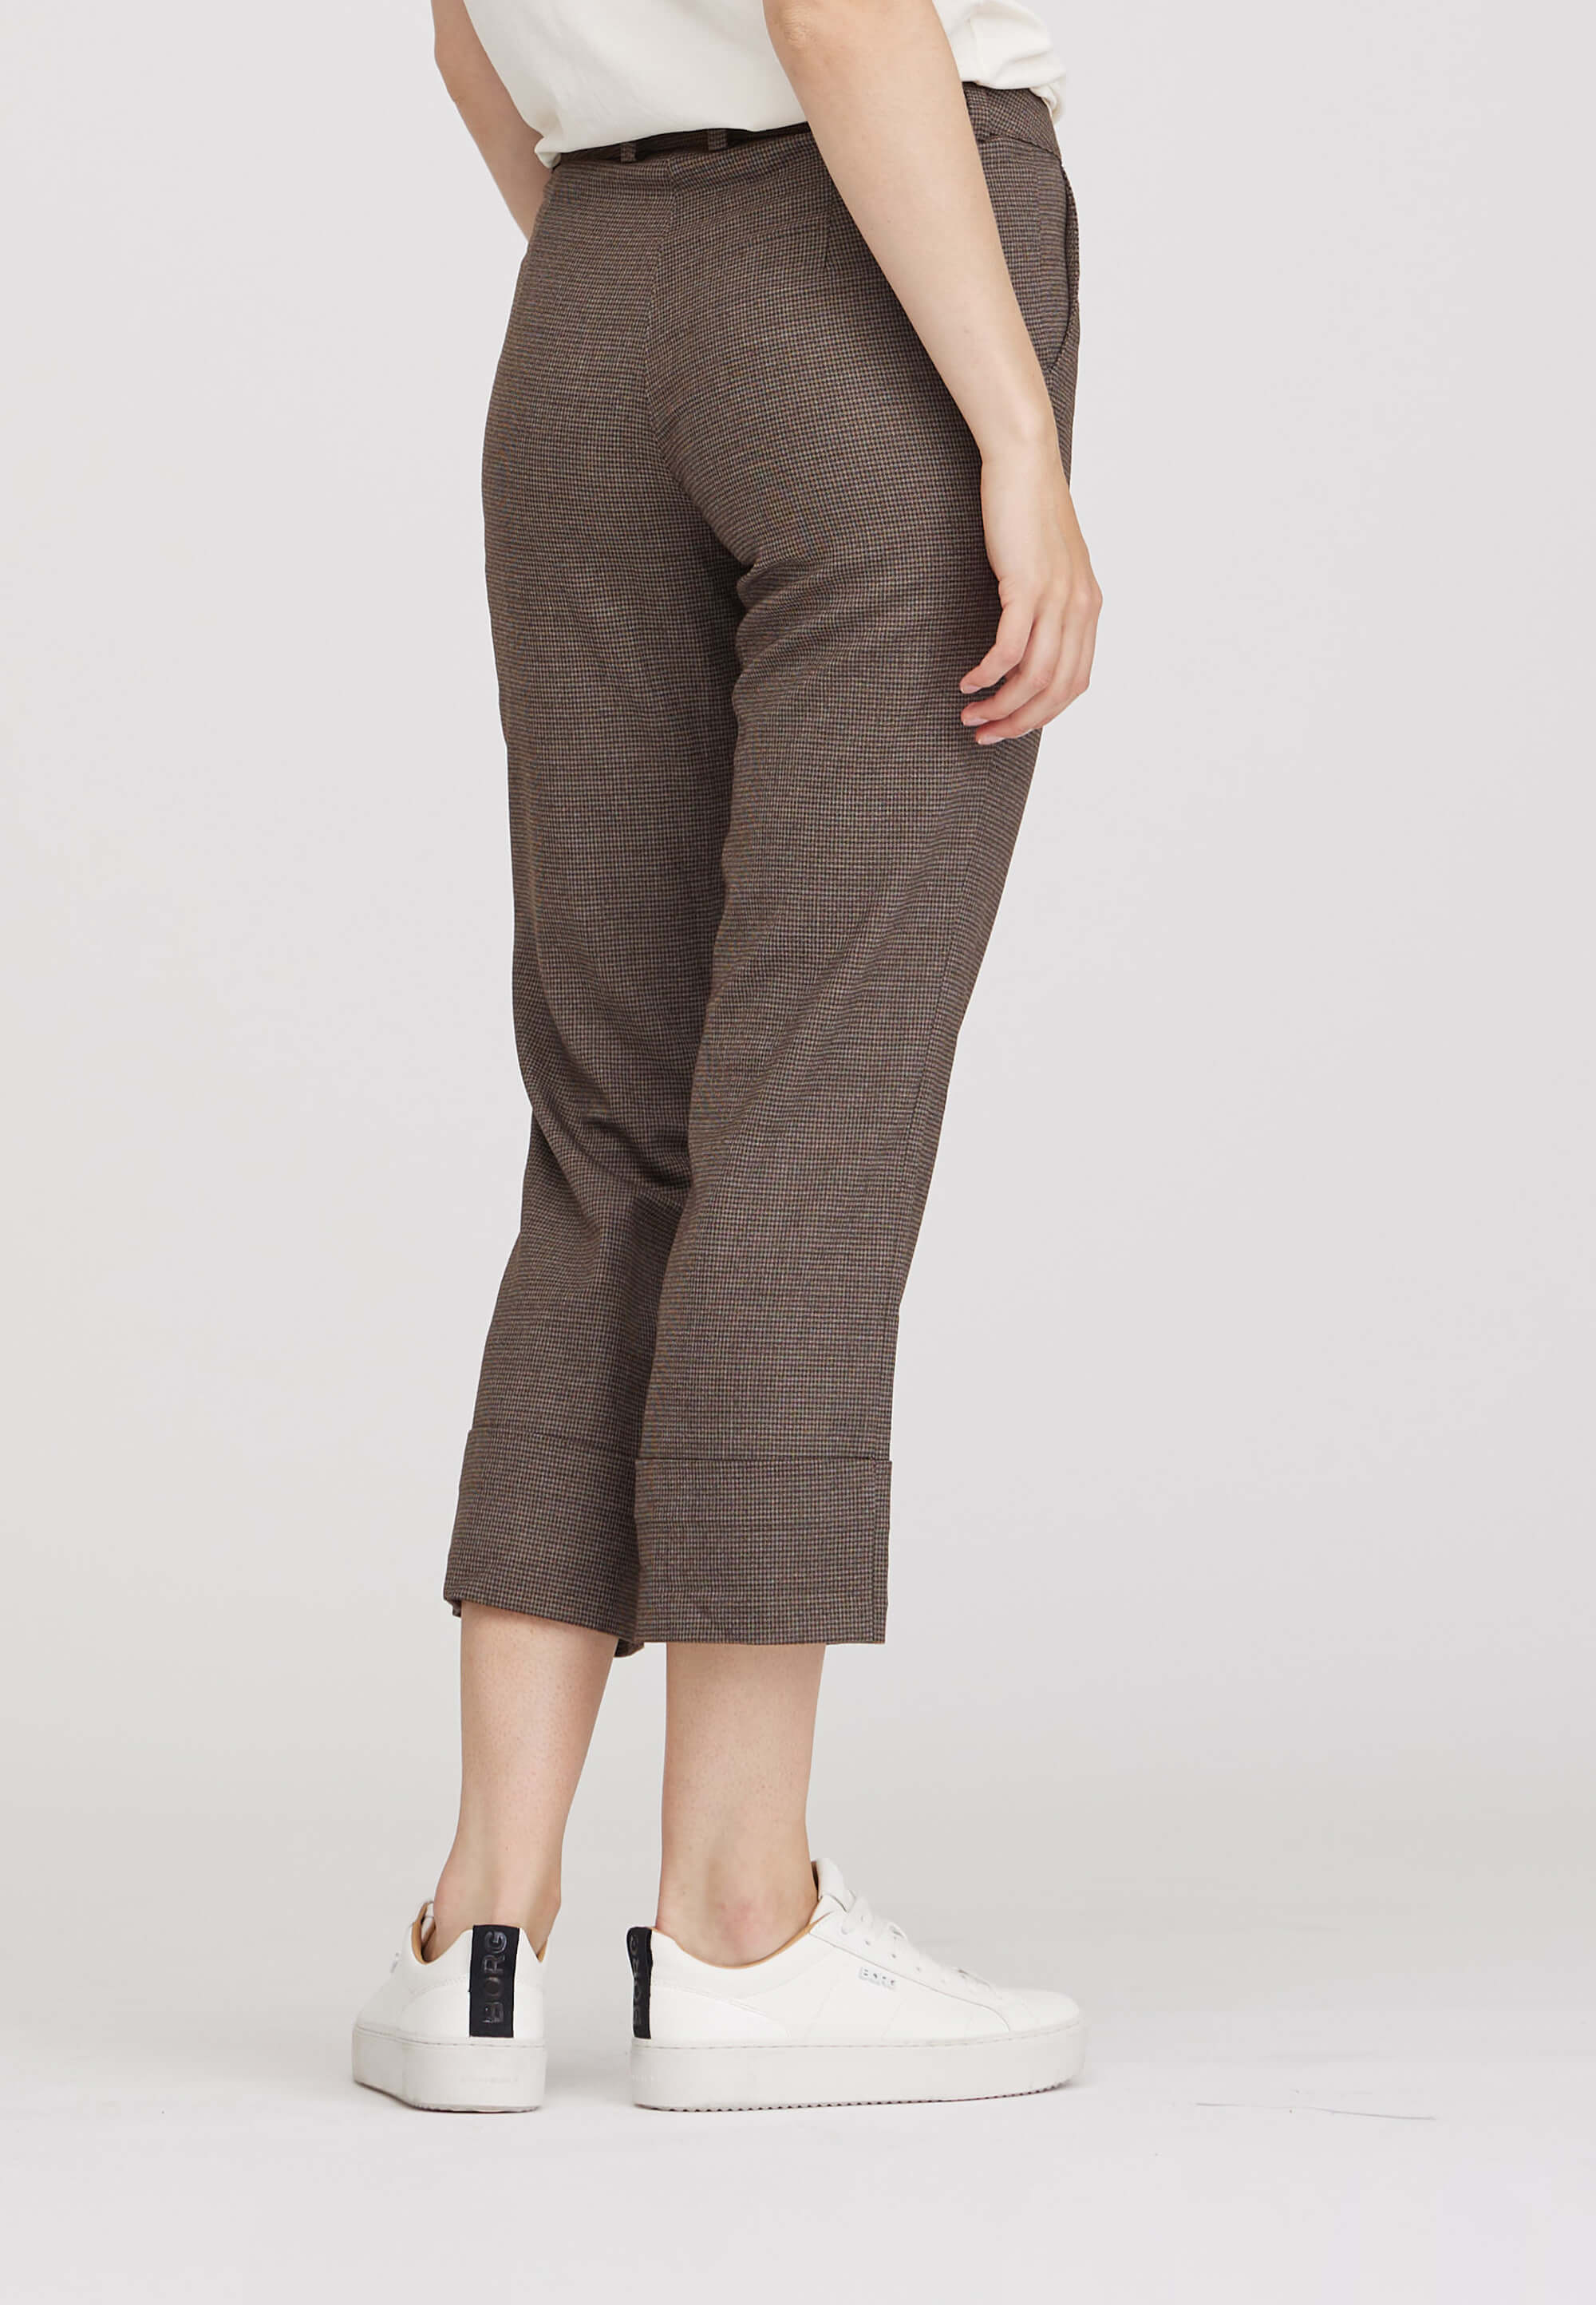 LAURIE Judy Turn-Up Straight Crop Trousers STRAIGHT 84300 Chocolate Chip H. Check